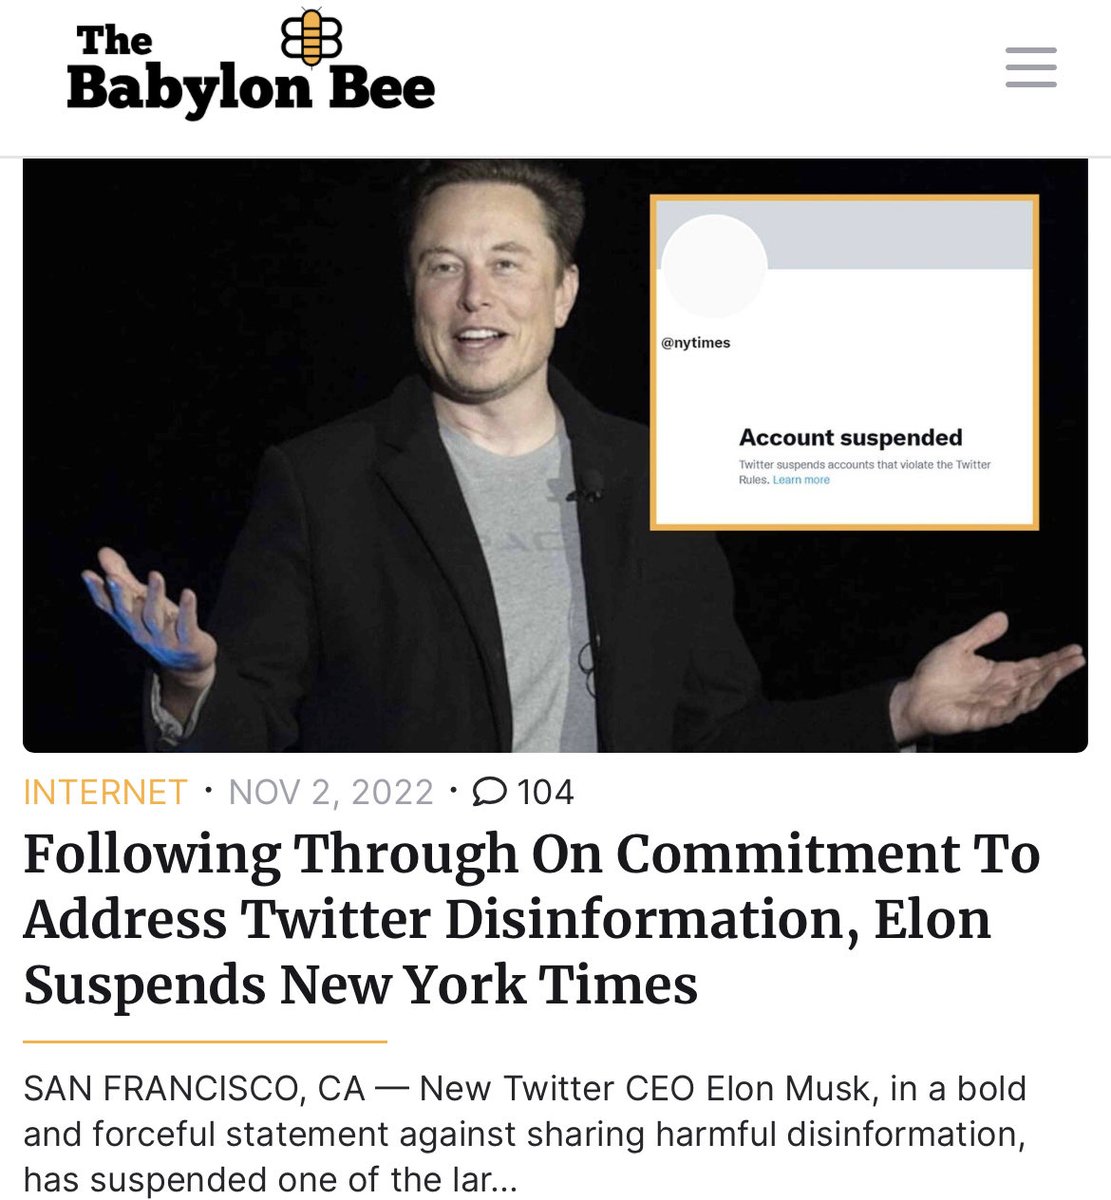 🐝🐝🐝🐝🐝🐝🐝🐝🐝 HOW AMAZING IF… 😝 Following Through On Commitment To Address Twitter Disinformation, Elon Suspends New York Times